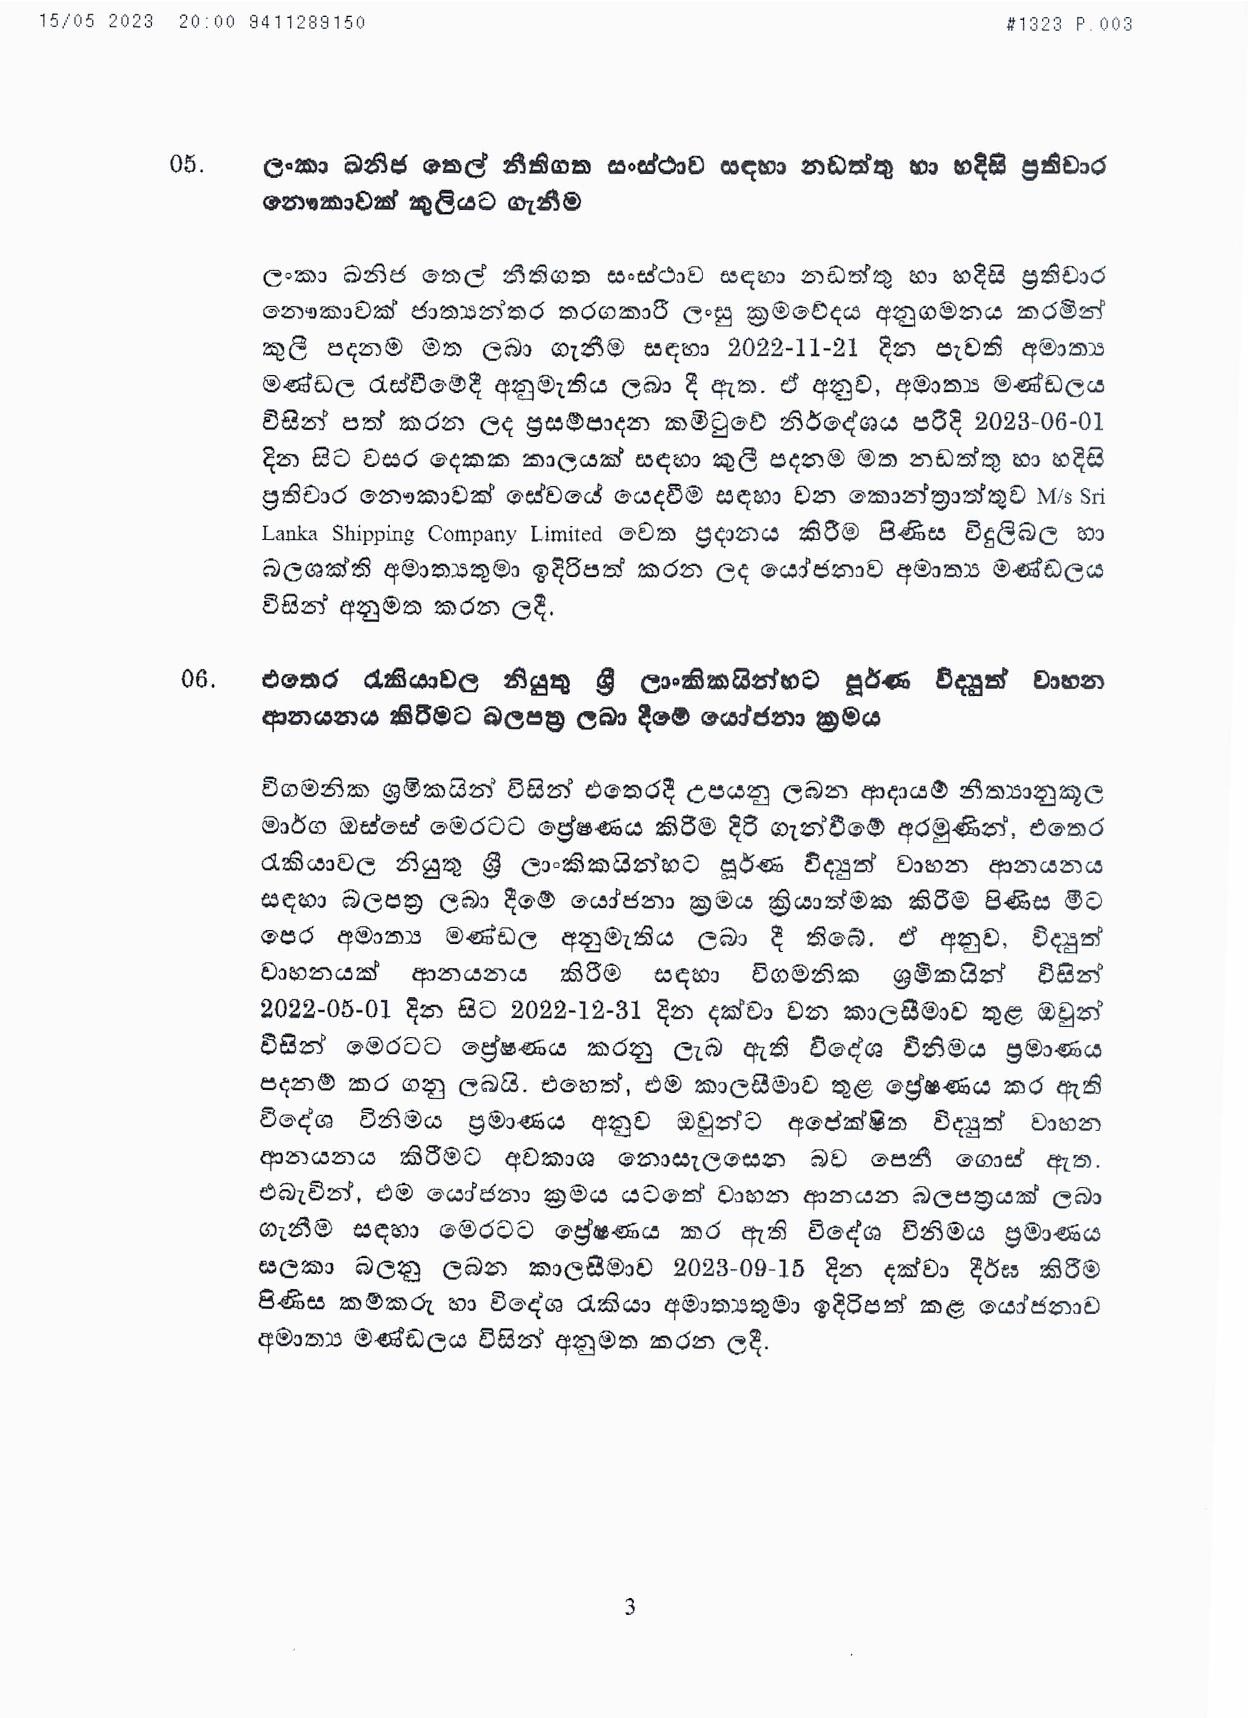 Cabinet Decision on 15.05.2023 page 003